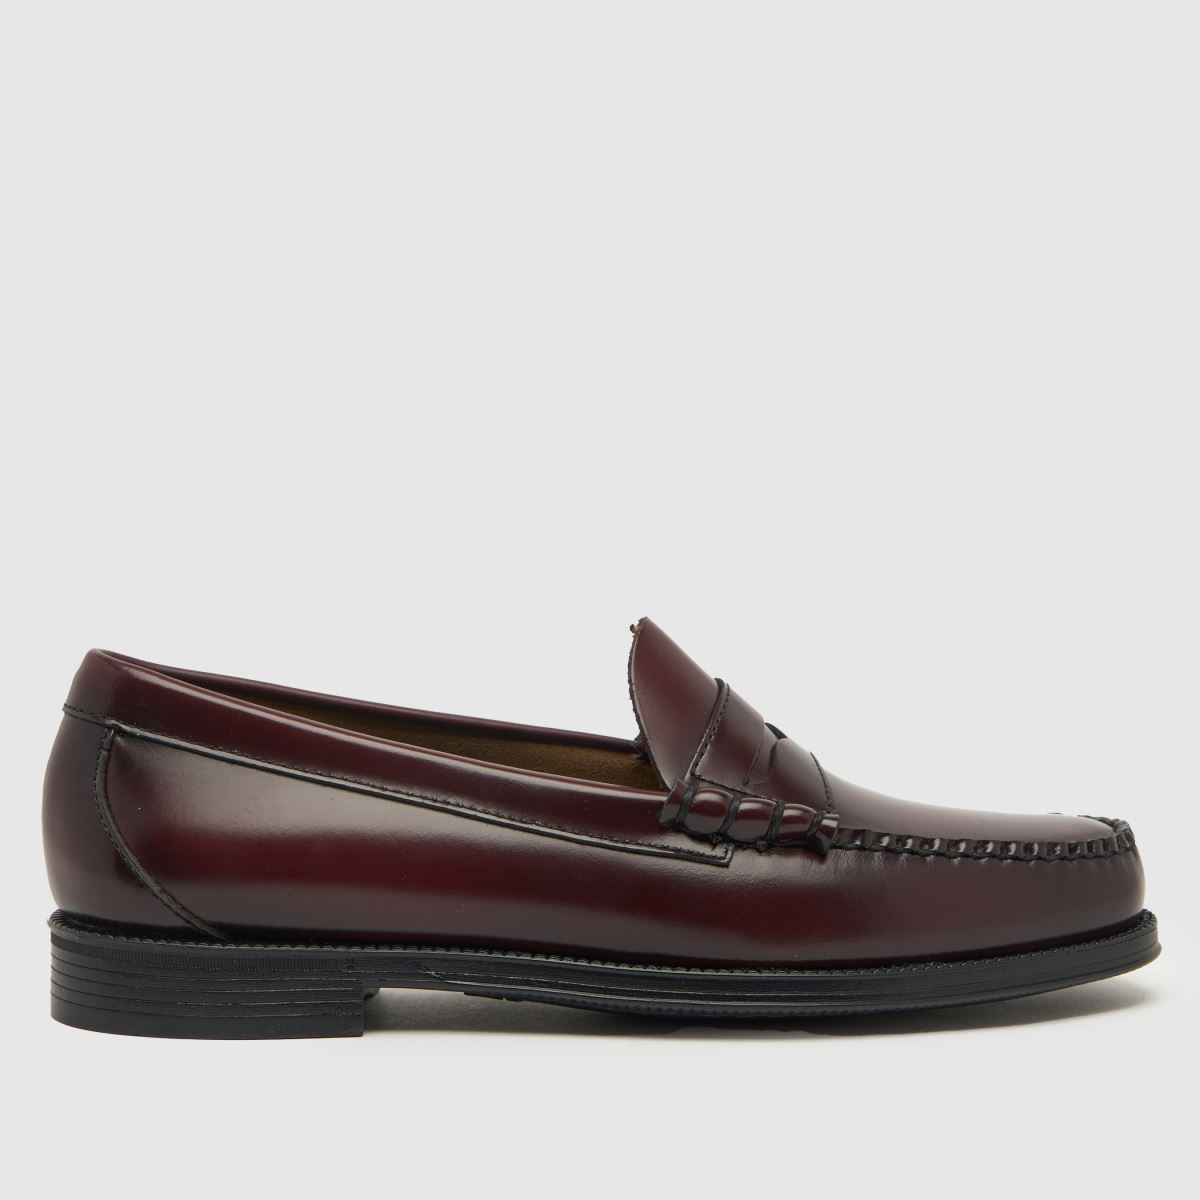 G.H. BASS easy weejuns larson loafer shoes in burgundy